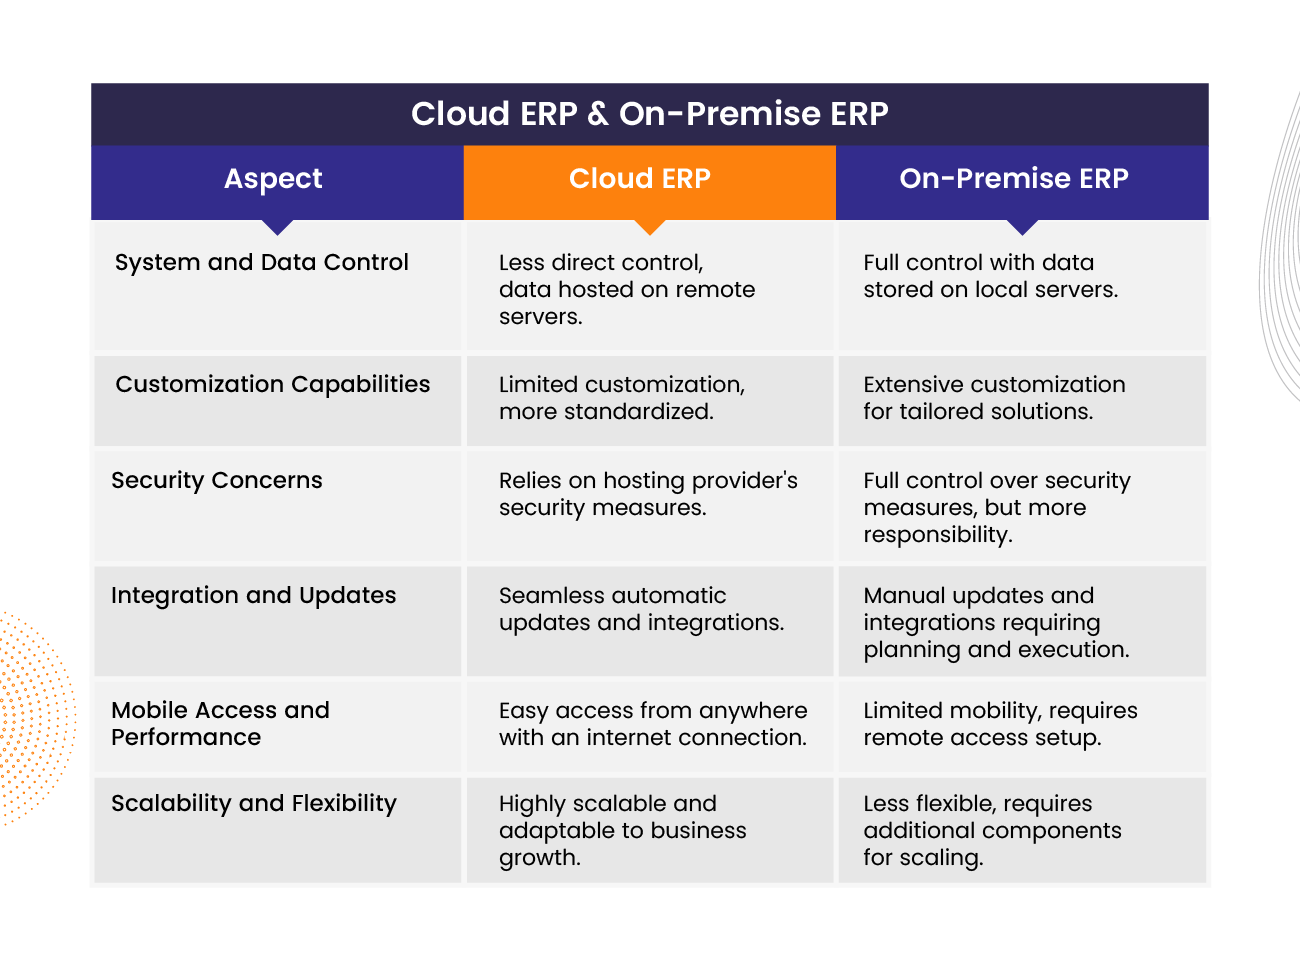 a table with points differentiating between cloud ERP and on-premise ERP